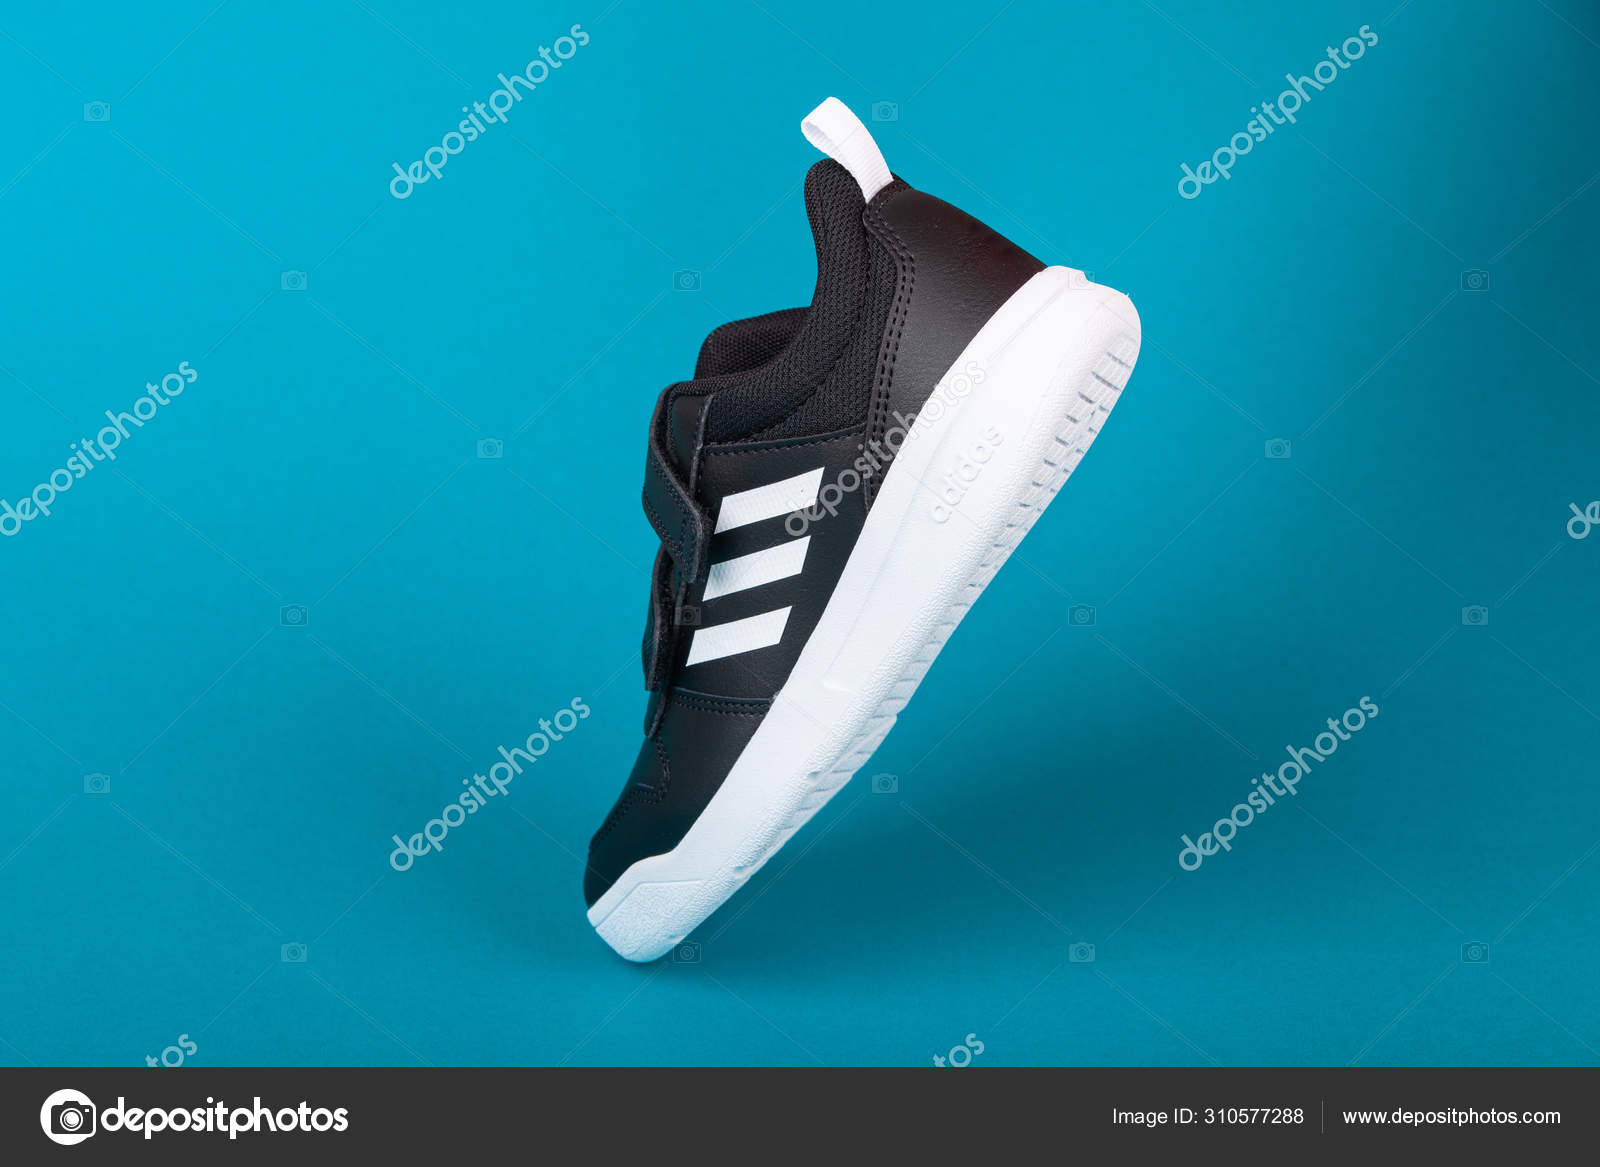 spiegel Ontwaken Aanvulling Varna , Bulgaria - AUGUST 13, 2019 : ADIDAS Tensauru sport shoe, on blue  background. Product shot. Adidas is a German corporation that designs and  manufactures sports shoes, clothing and accessories – Stock Editorial Photo  © dechevm #310577288